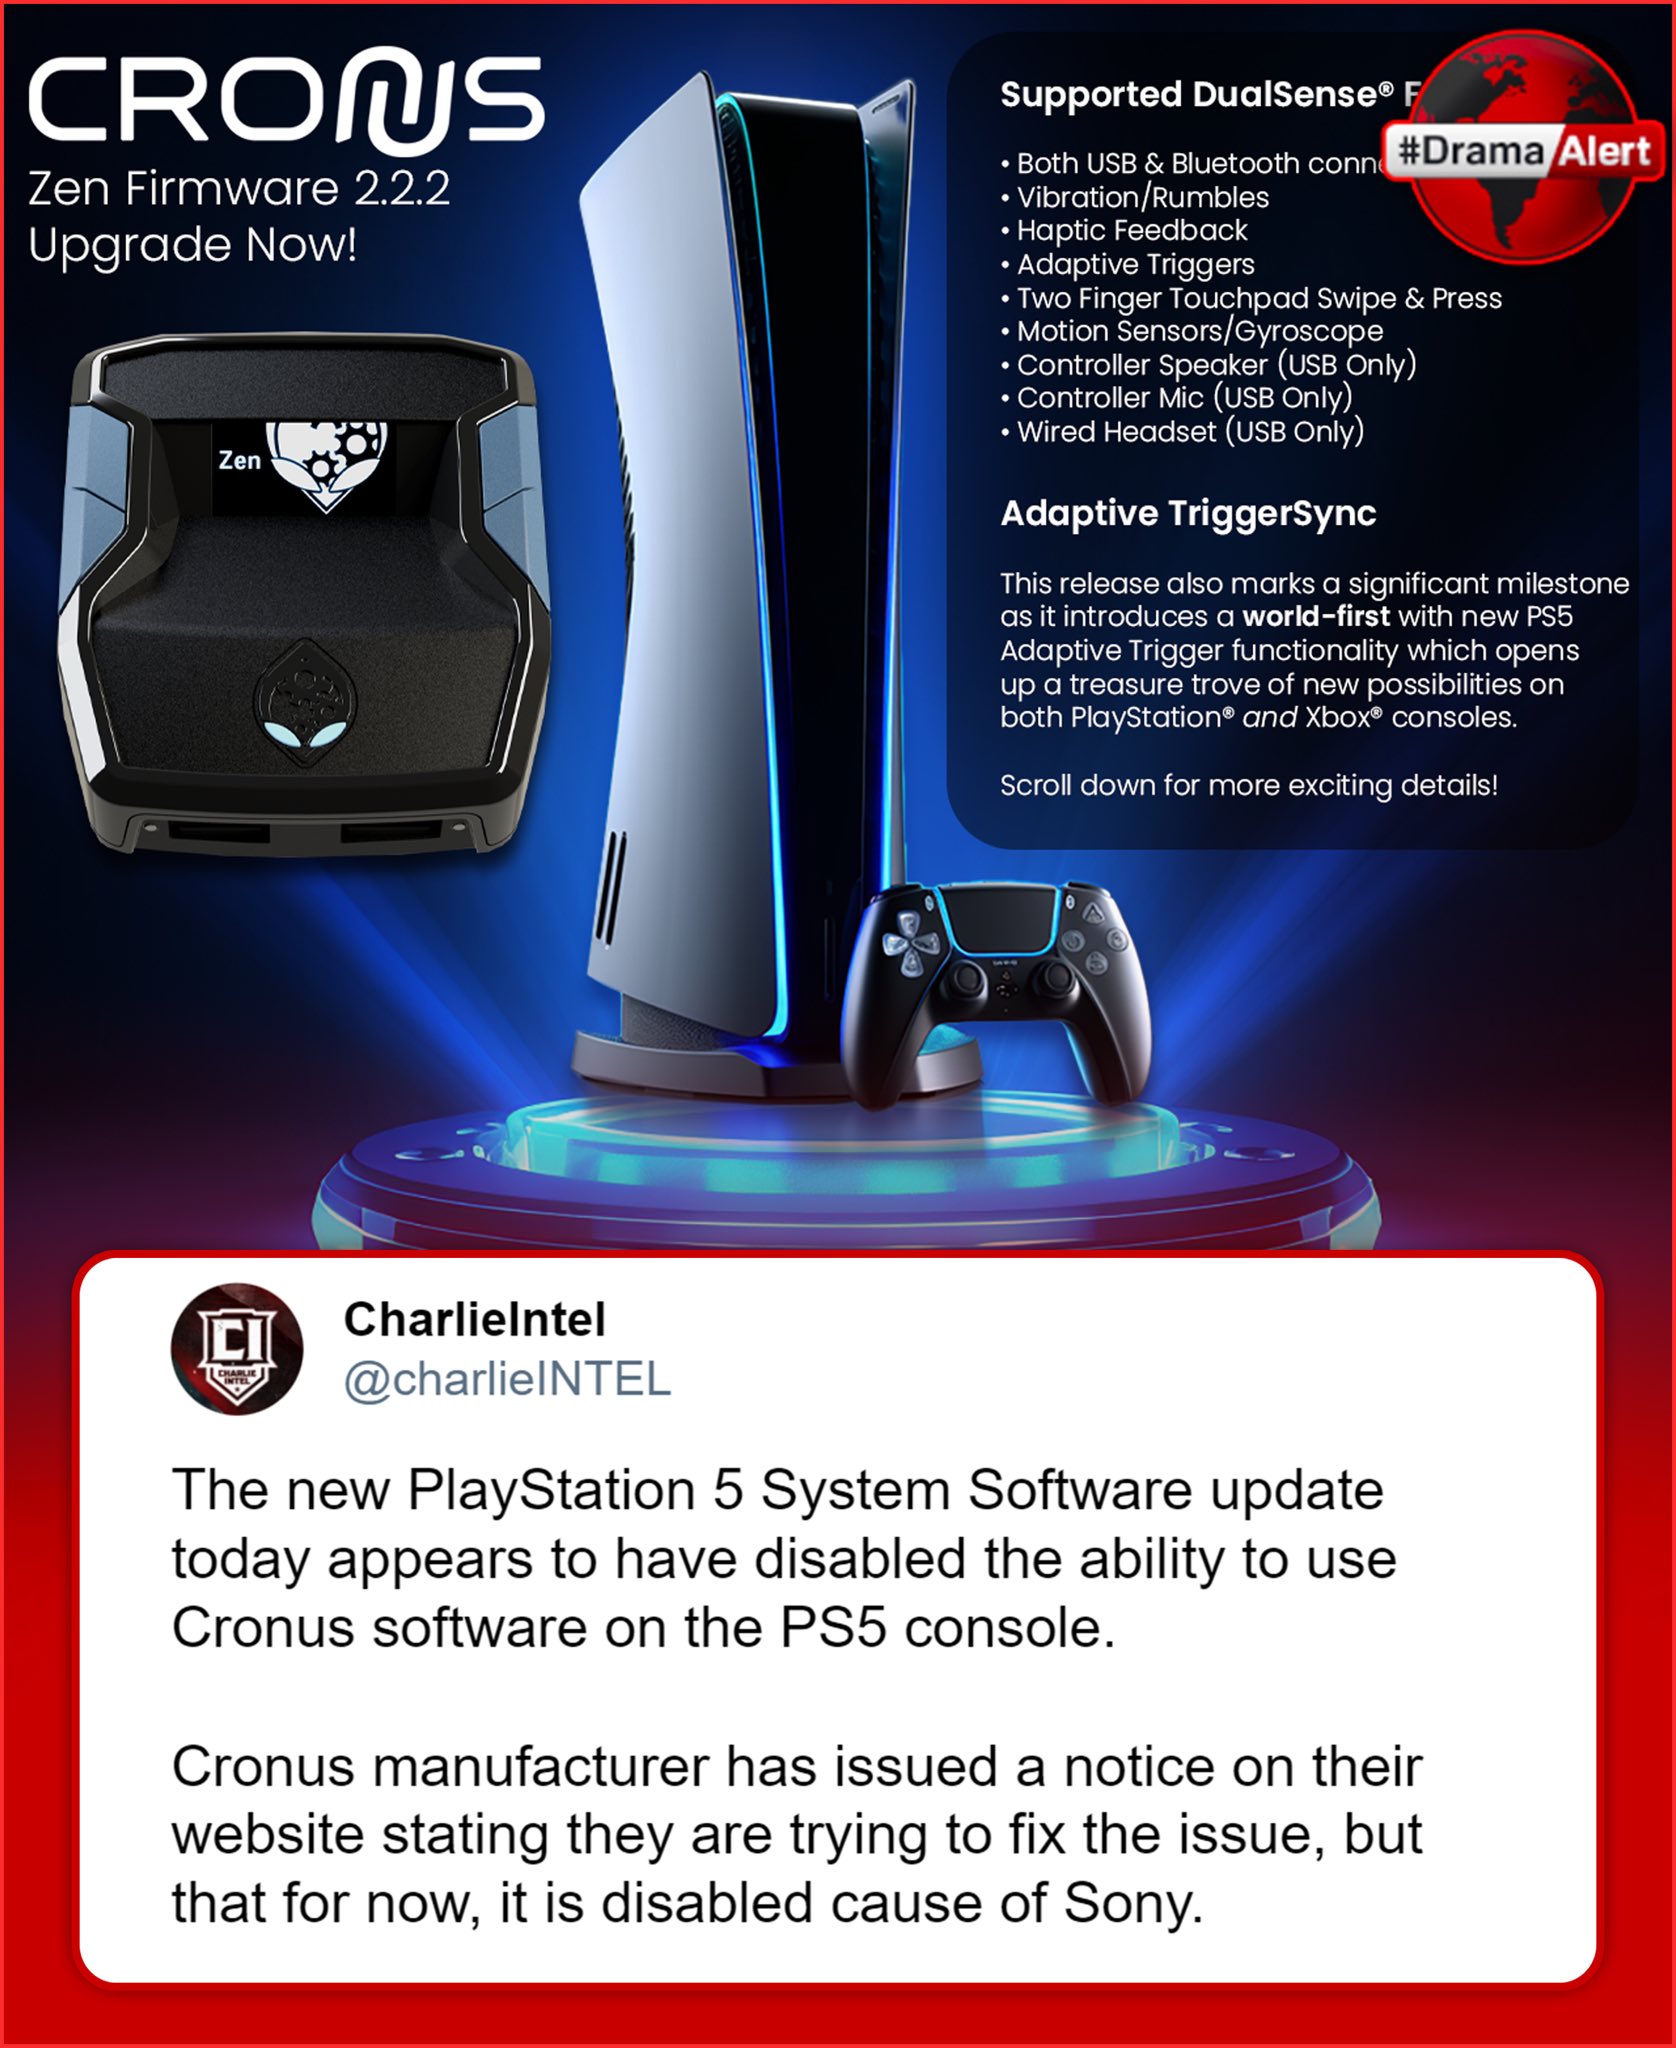 DramaAlert on X: The Cronus Zen has been PATCHED on PS5 consoles